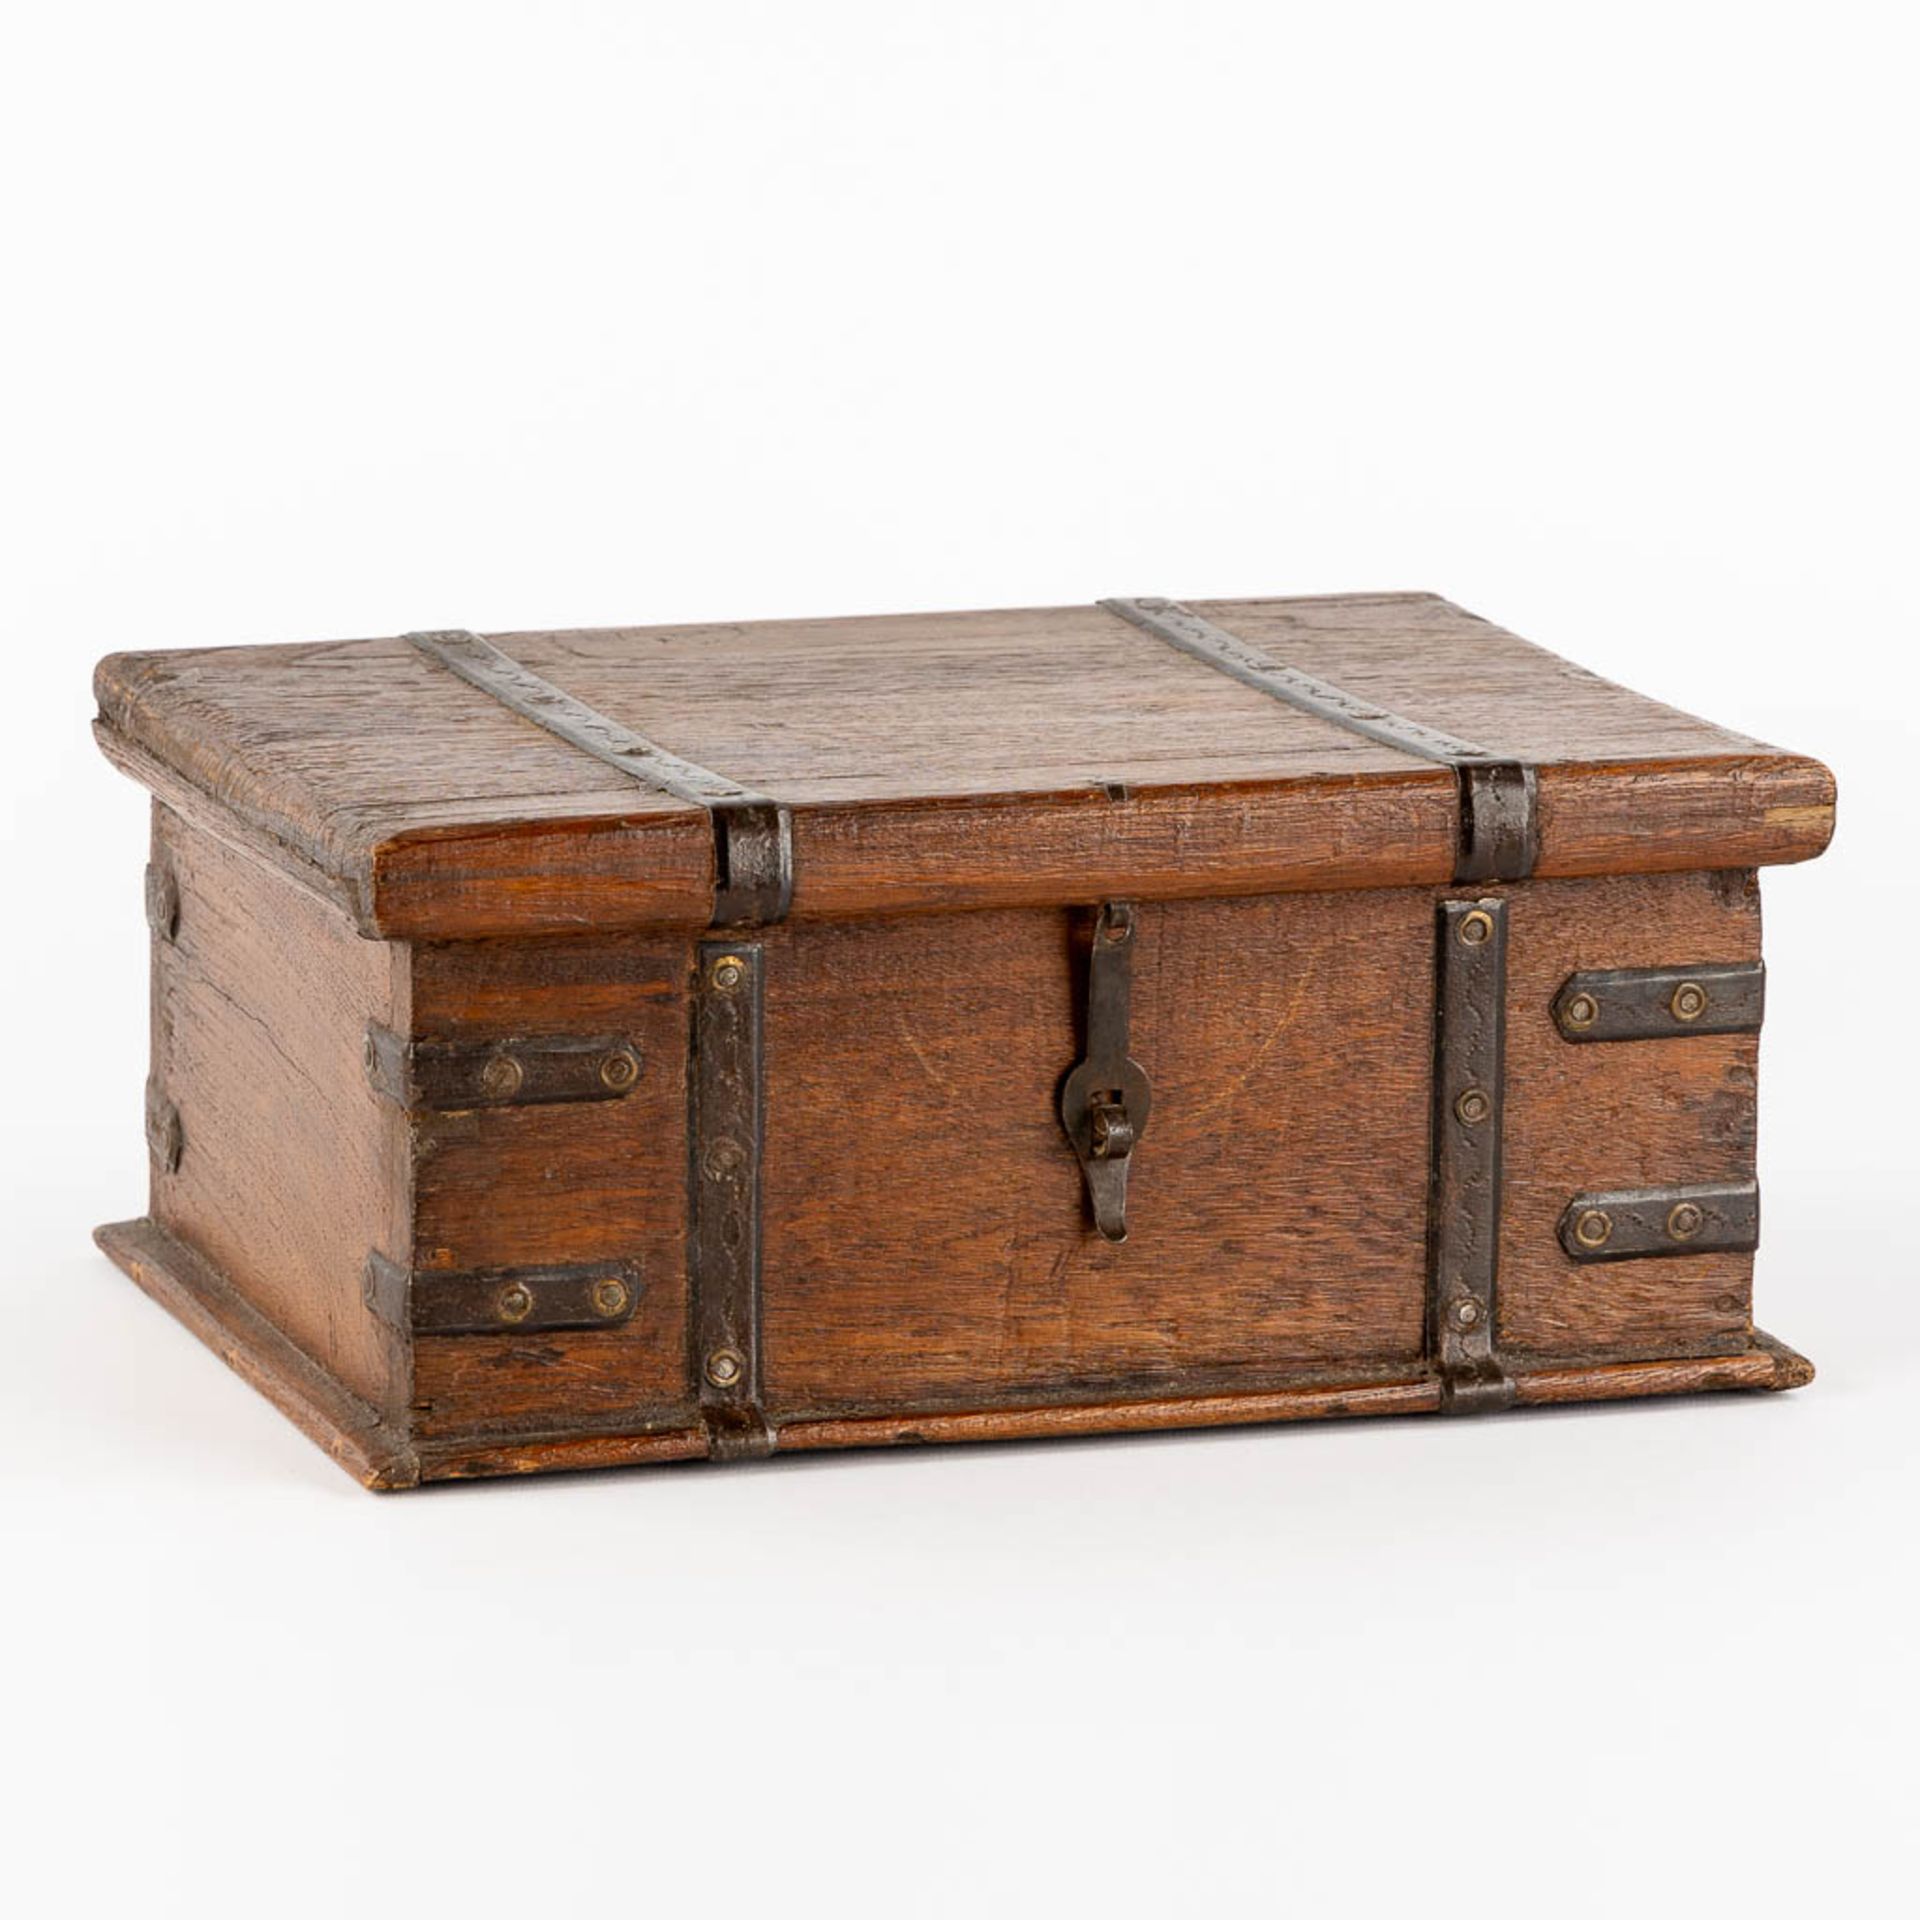 An antique money box or storage chest, oak and wrought iron, 19th C. (L:23 x W:31 x H:13 cm)